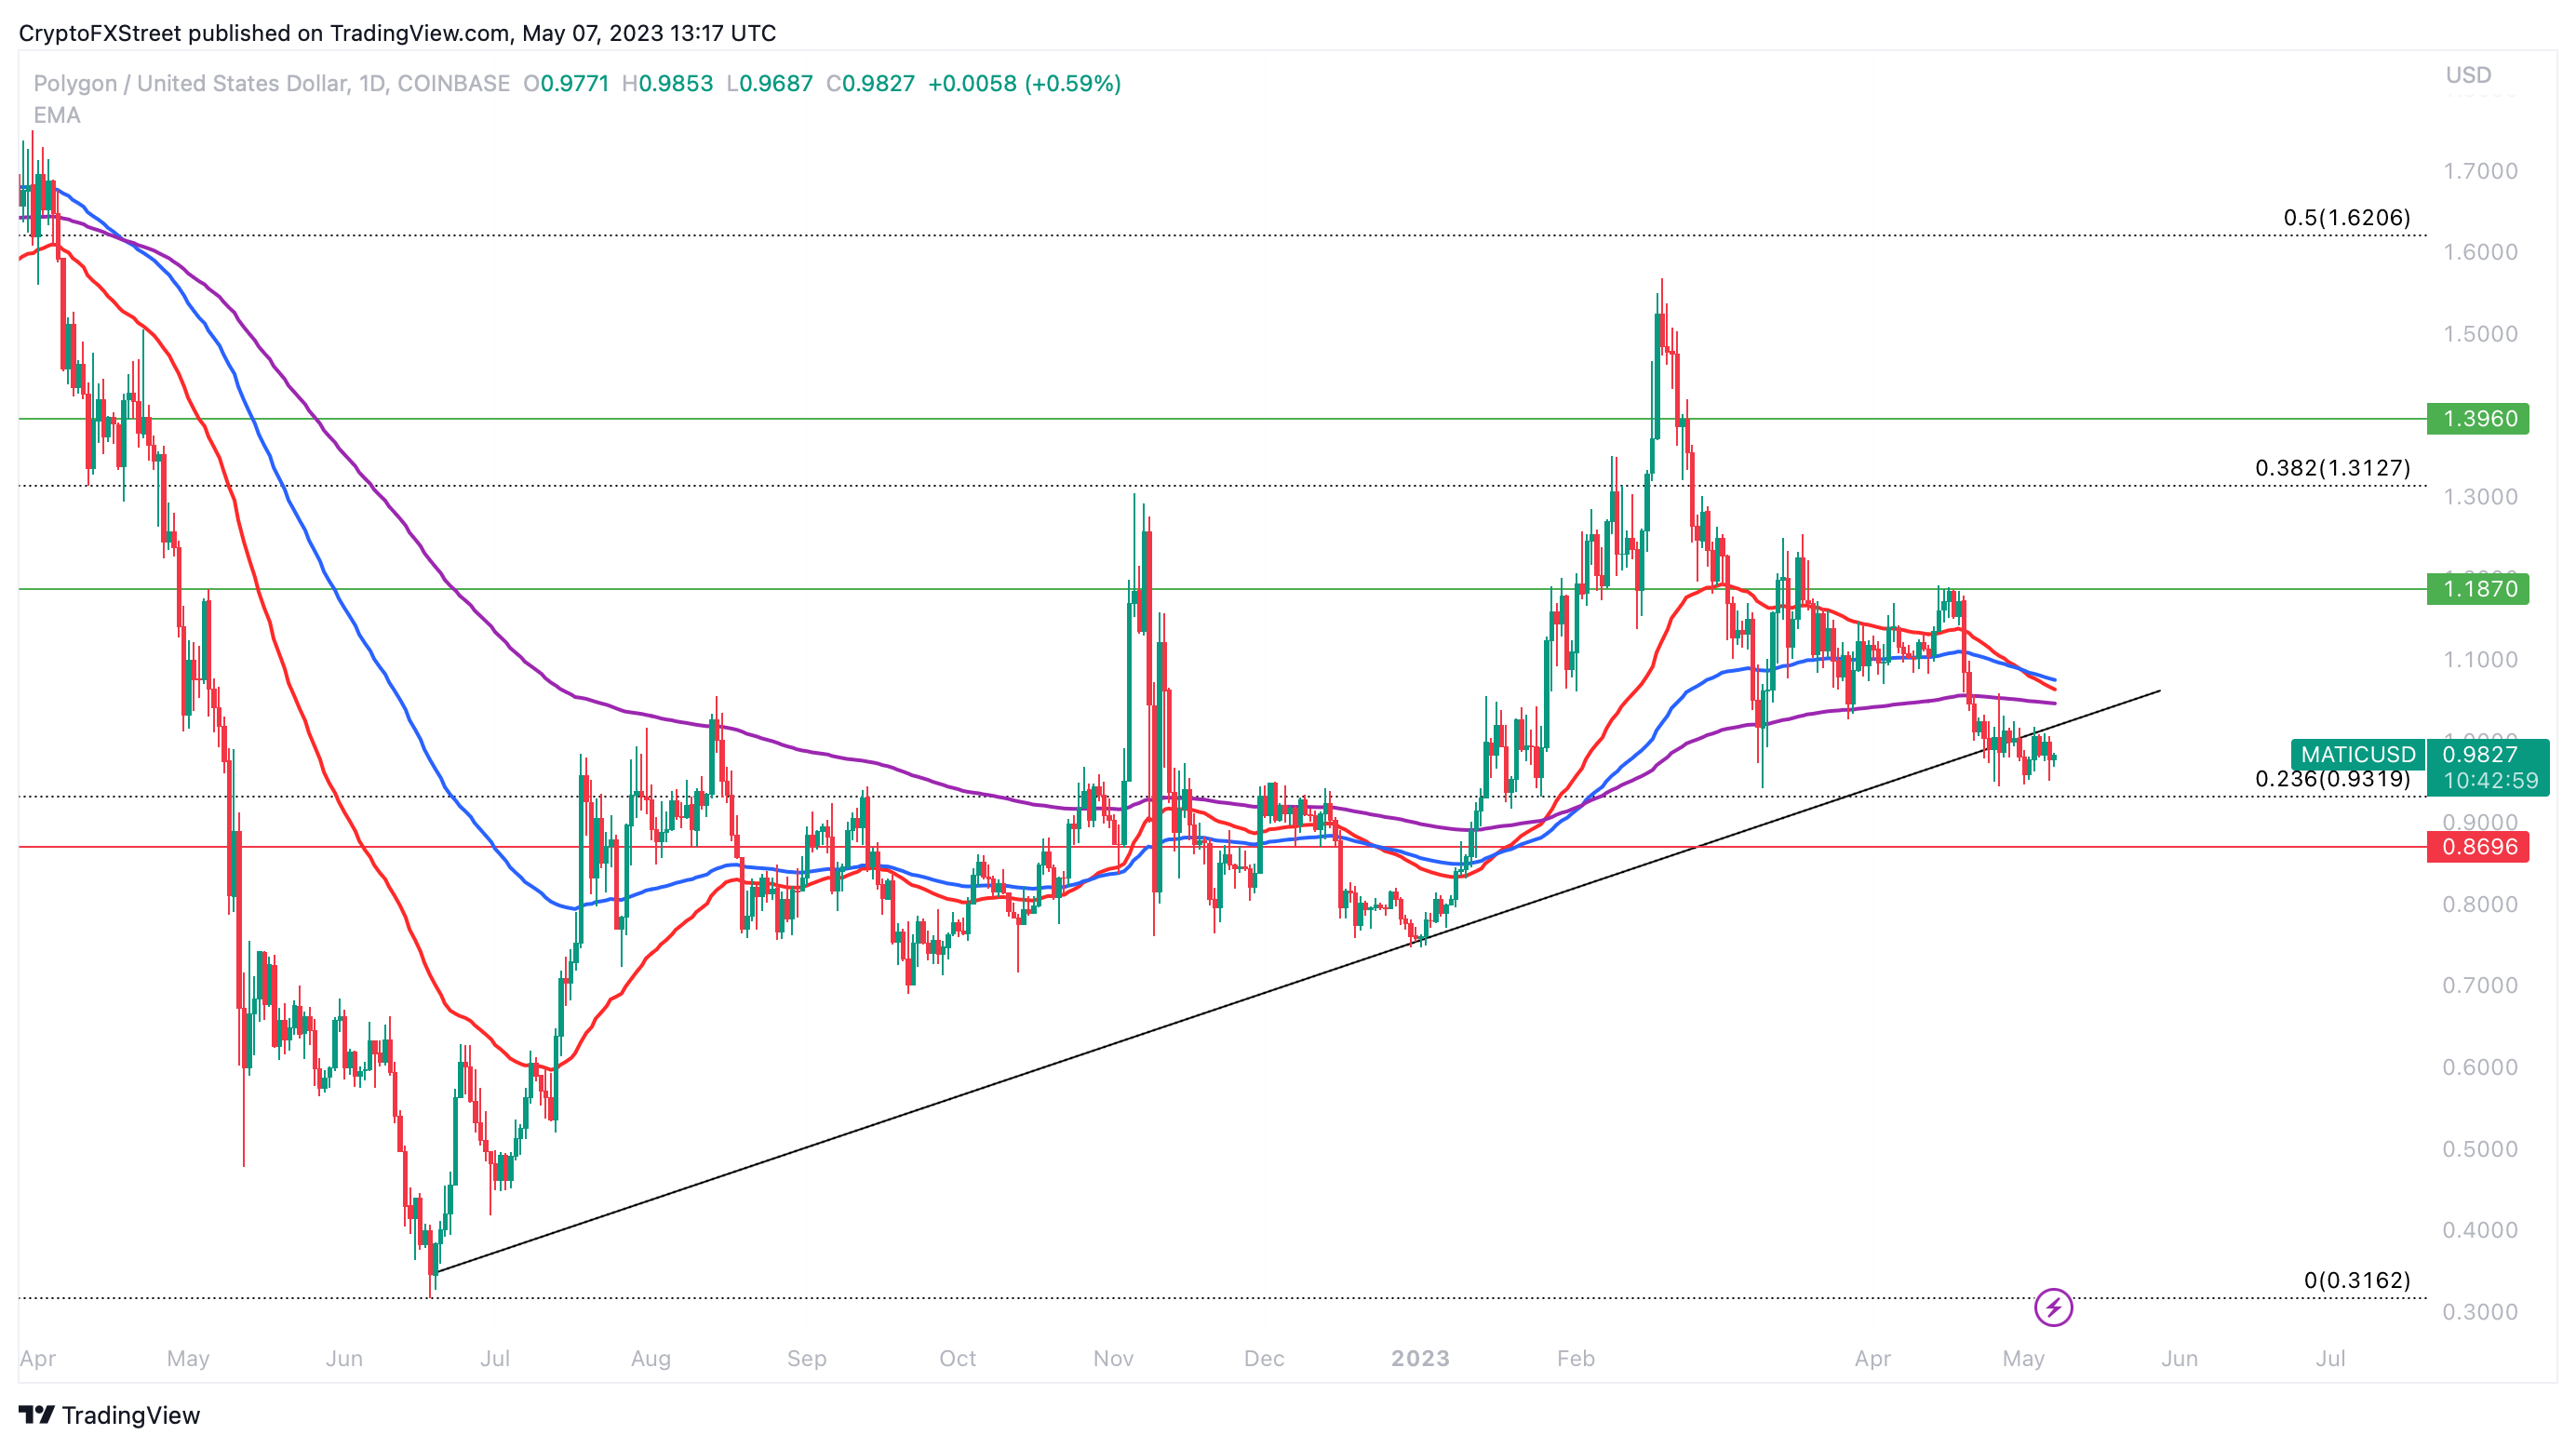 MATIC/USD 1D price chart